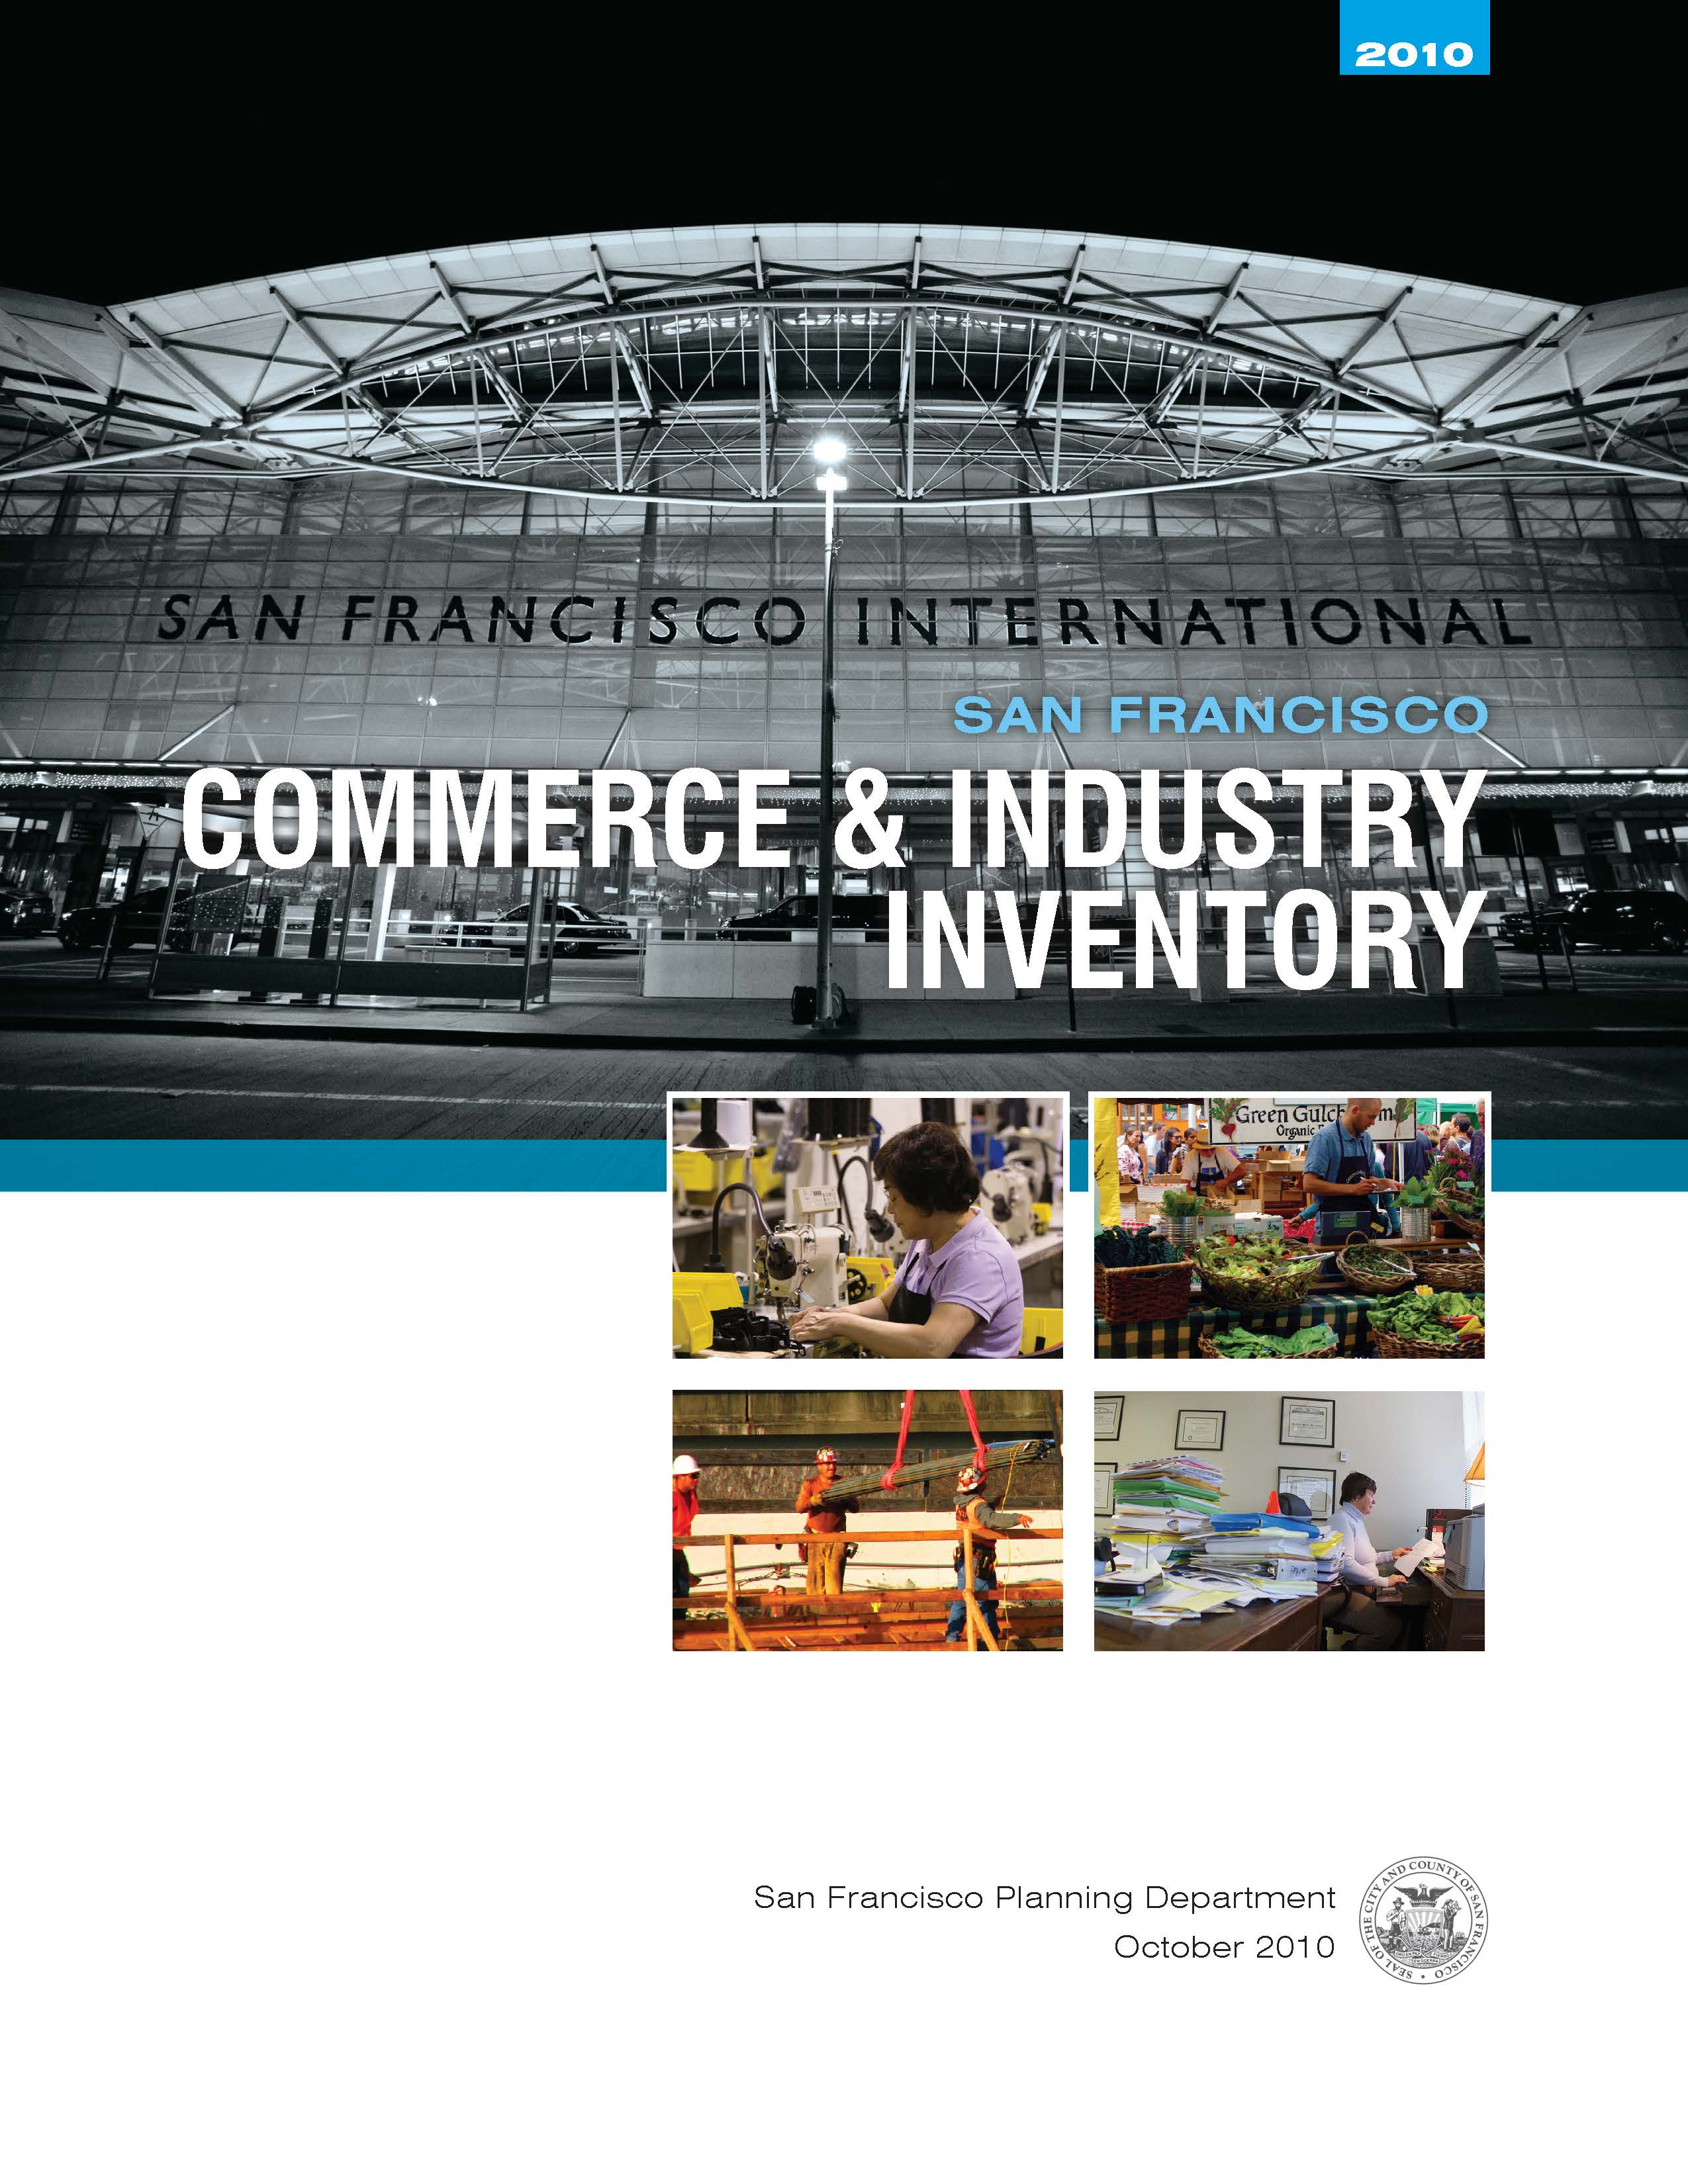 Cover Image for the Commerce & Industry Inventory Report 2010